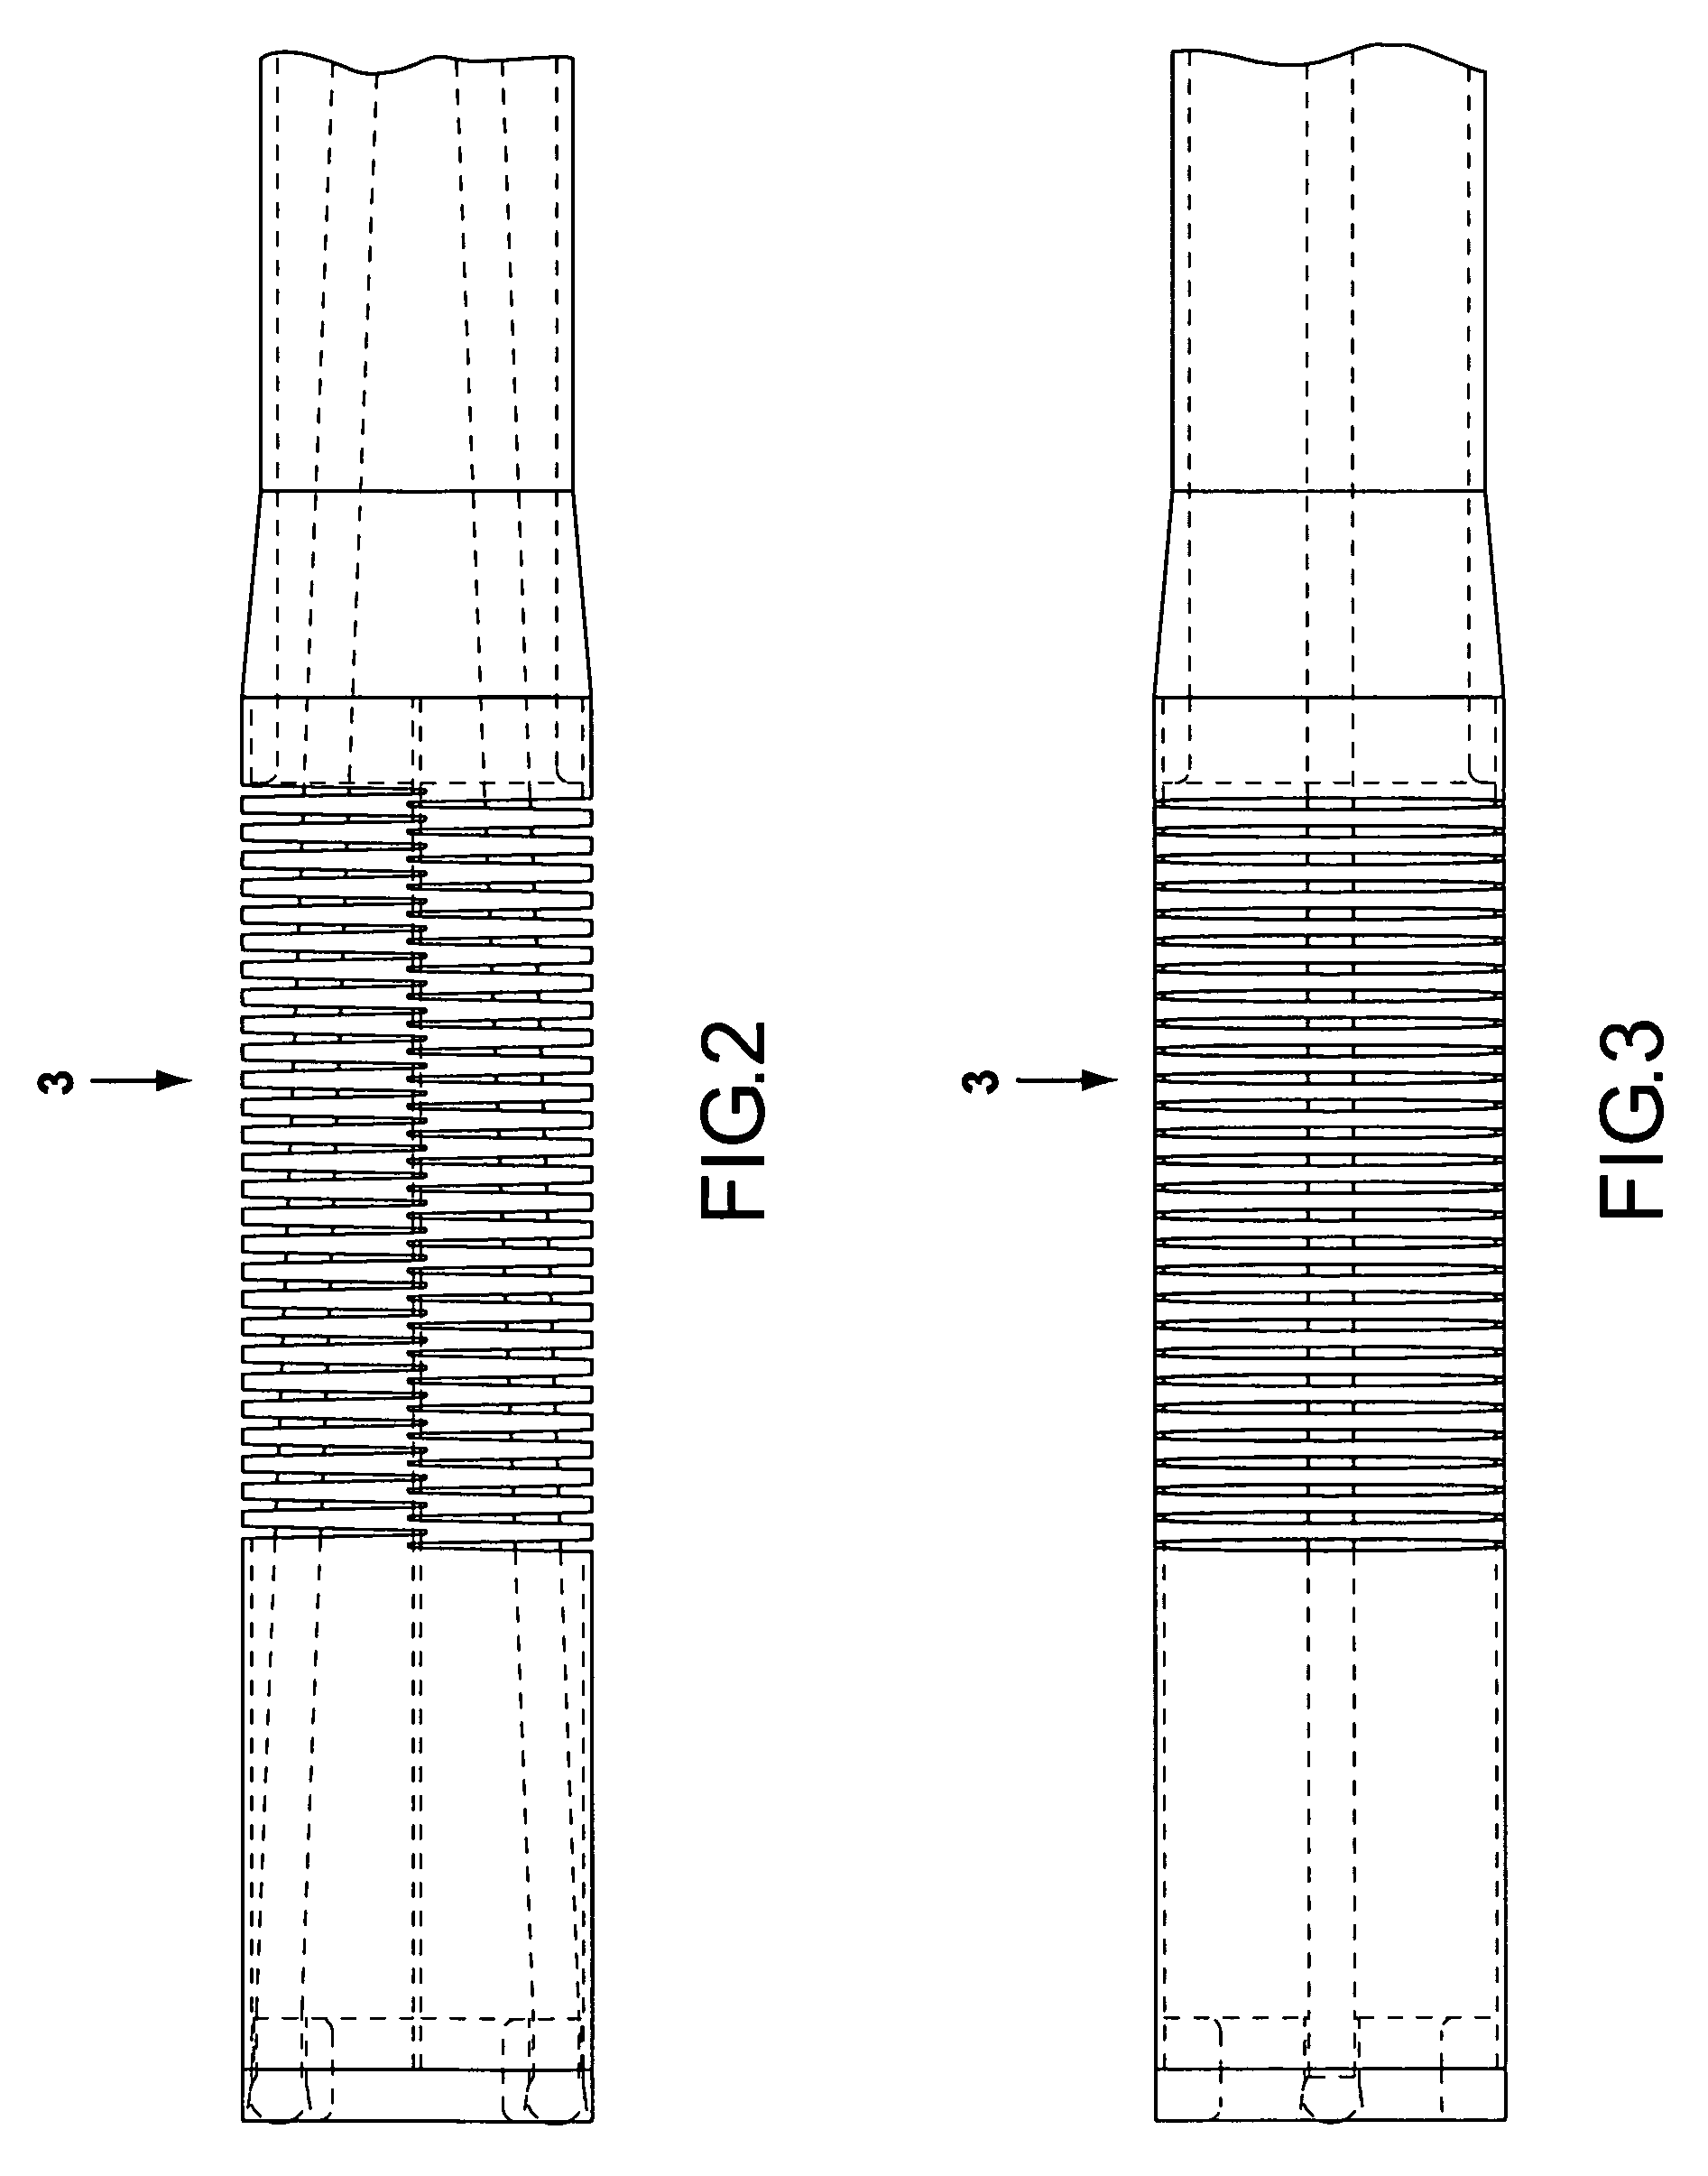 Steerable ablation device